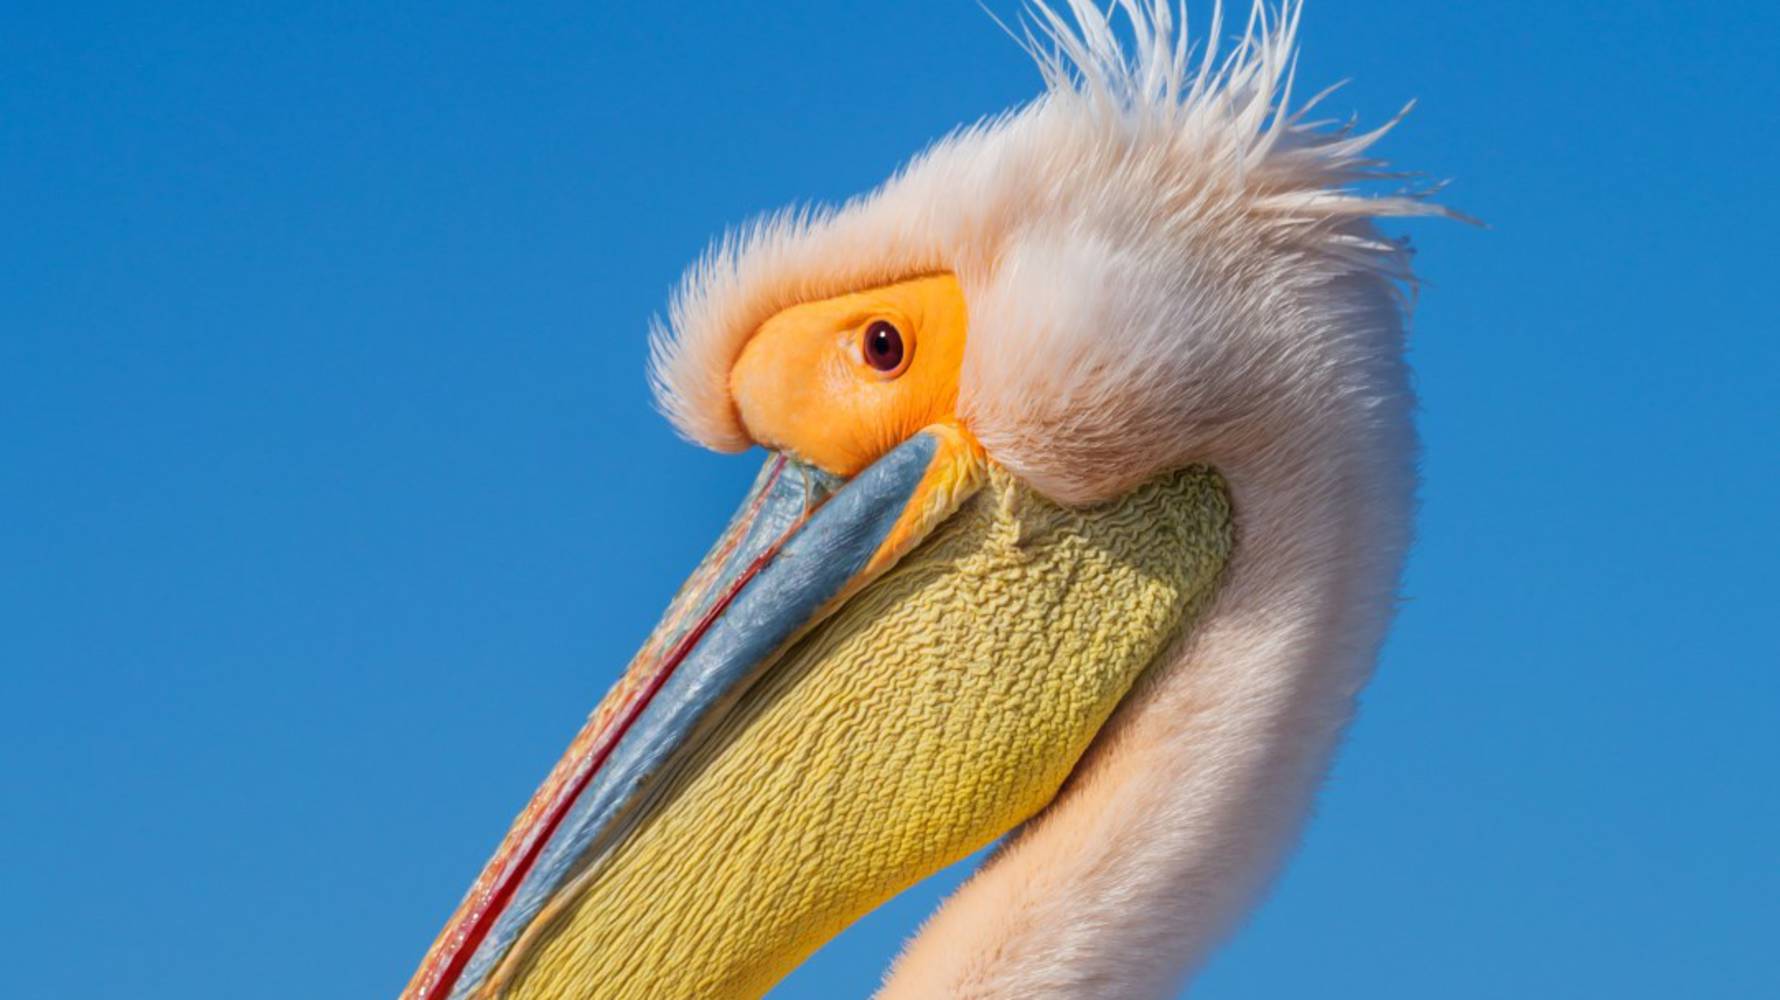 Great_White_Pelican_(Large)